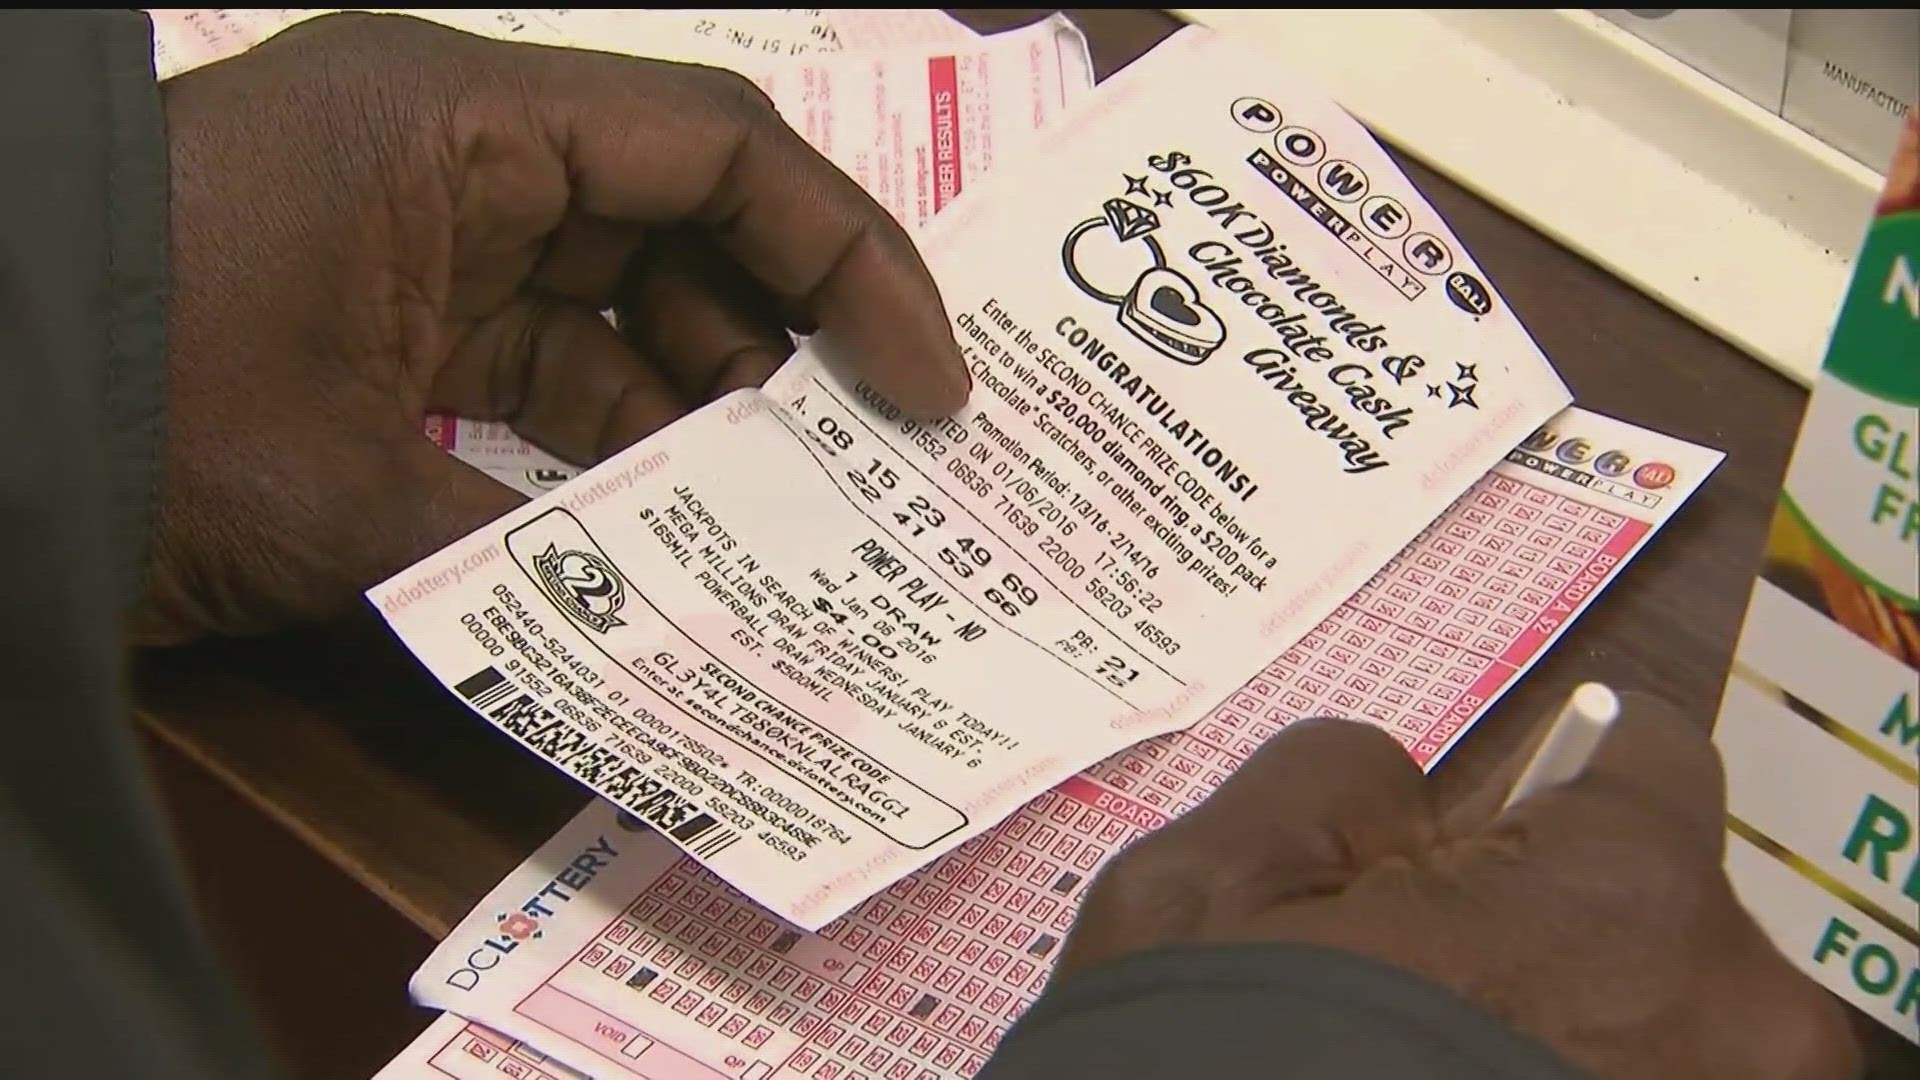 The chances of winning are one in about 292 million. The Powerball drawing is Monday night.